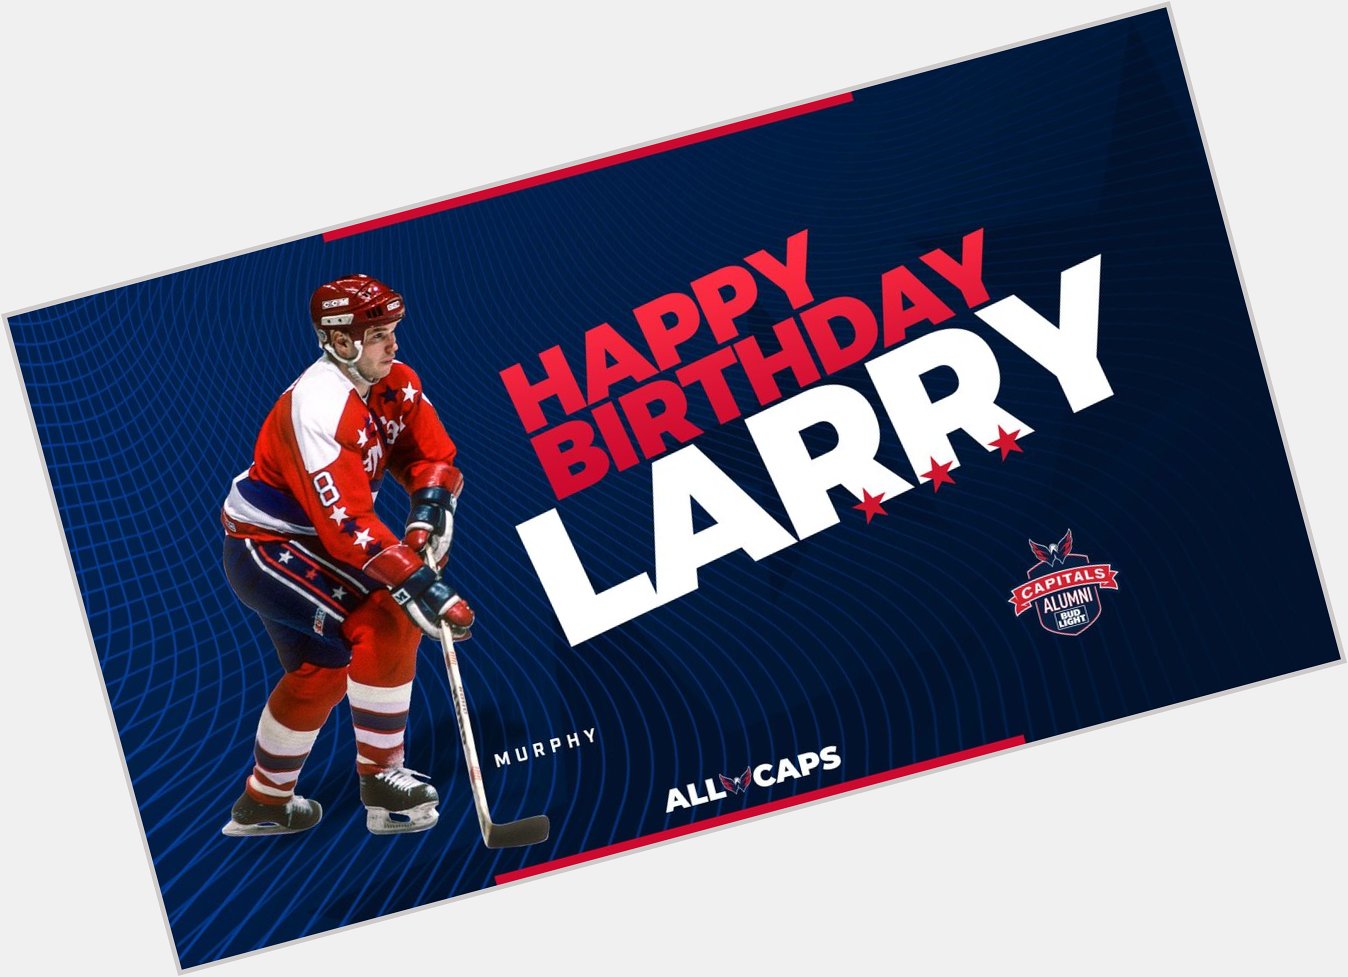 Wishing Caps alum and Hall of Famer Larry Murphy a Happy Birthday! 